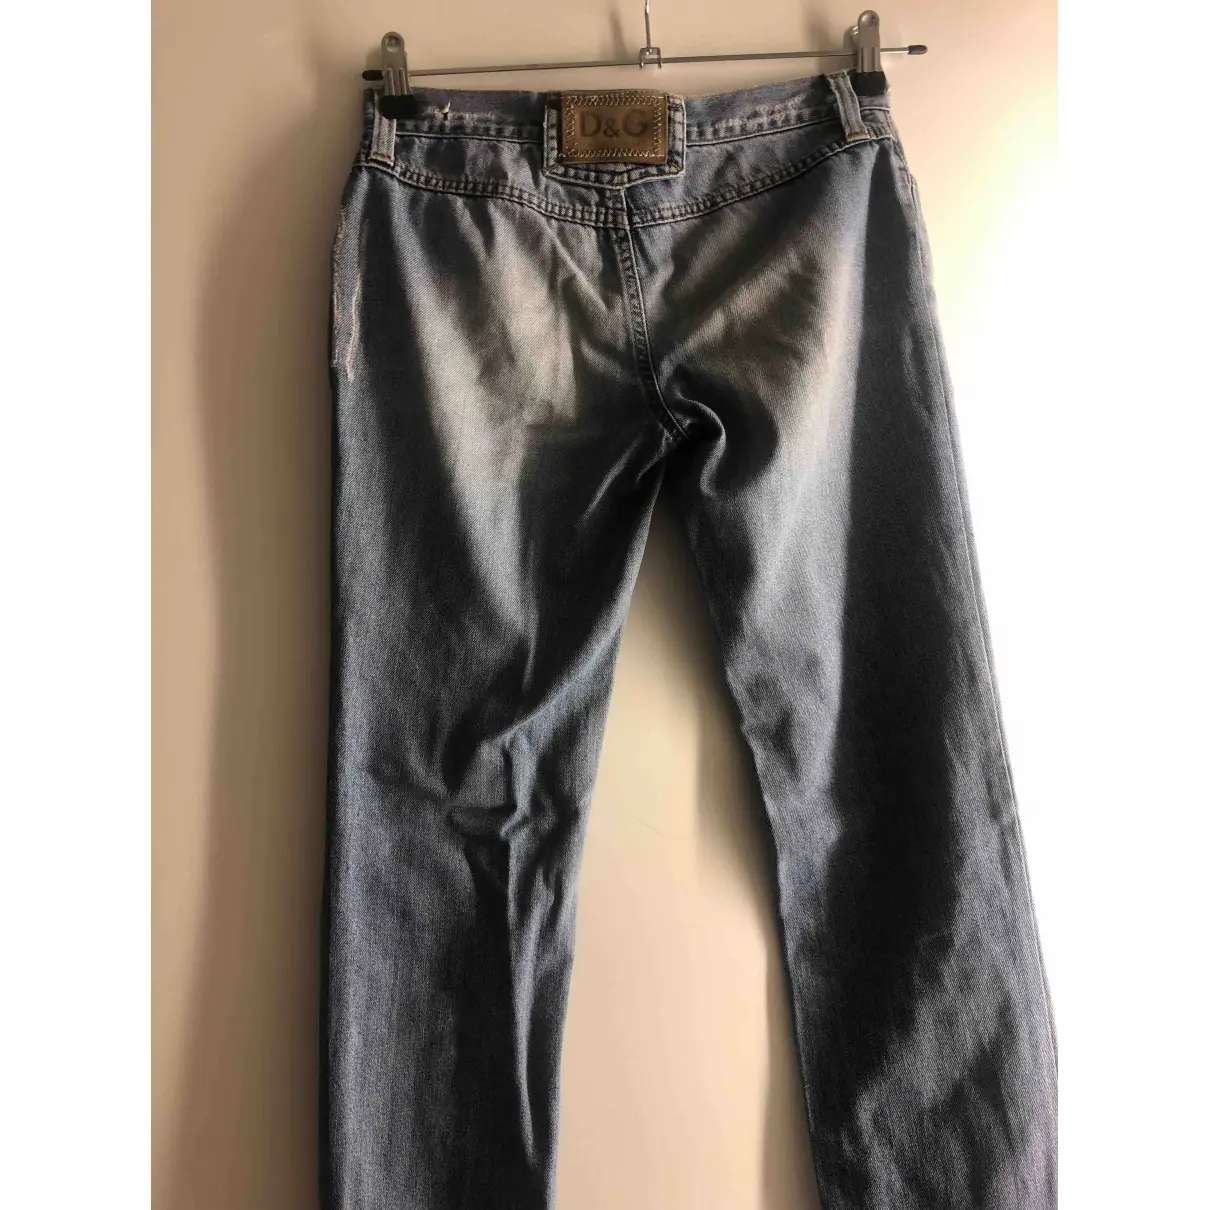 D&G Straight jeans for sale